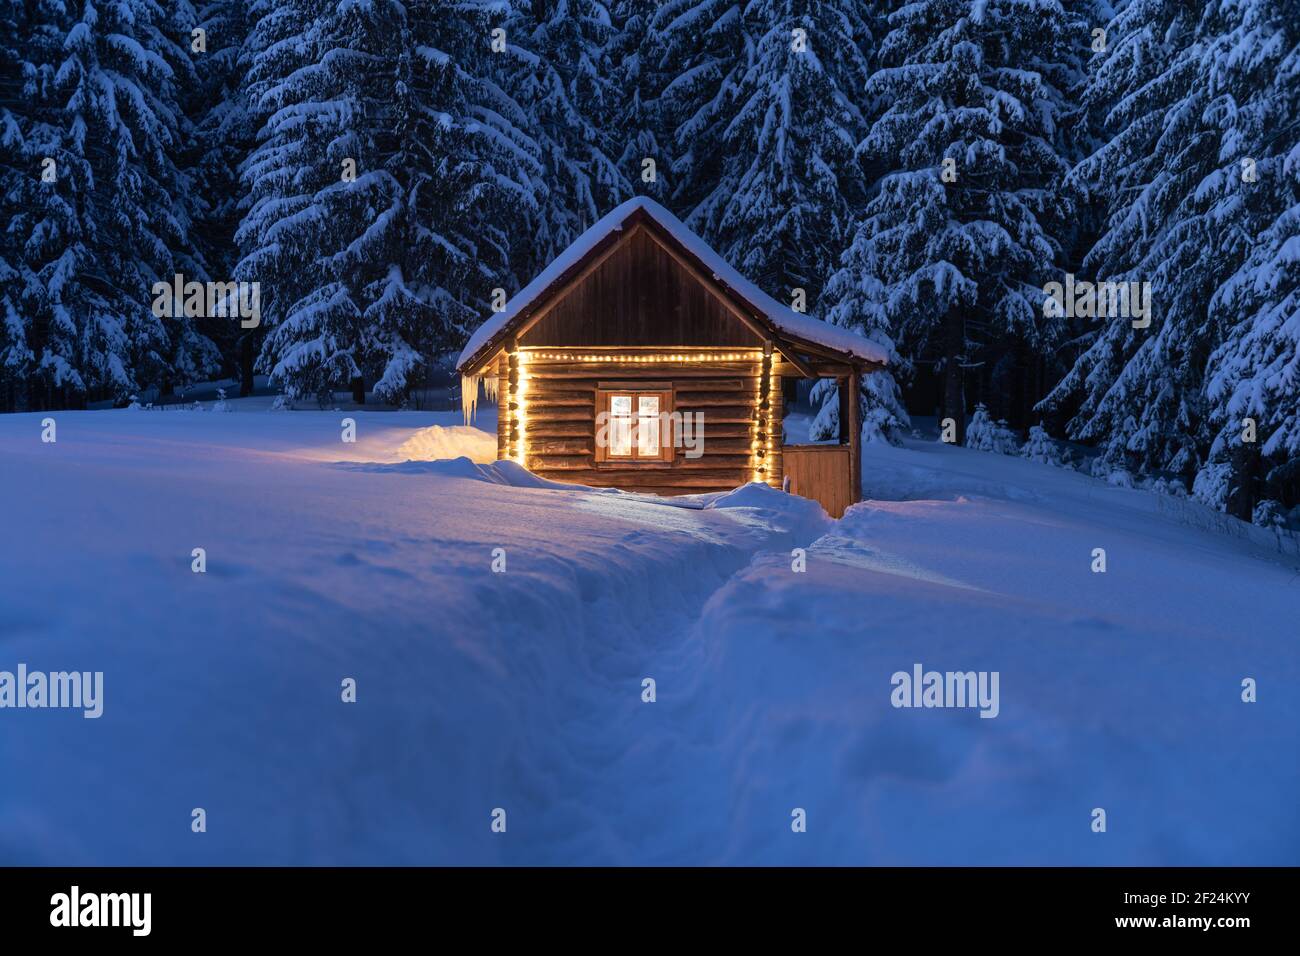 Fantastic winter landscape with glowing wooden cabin in snowy forest. Cozy house in Carpathian mountains. Christmas holiday concept Stock Photo